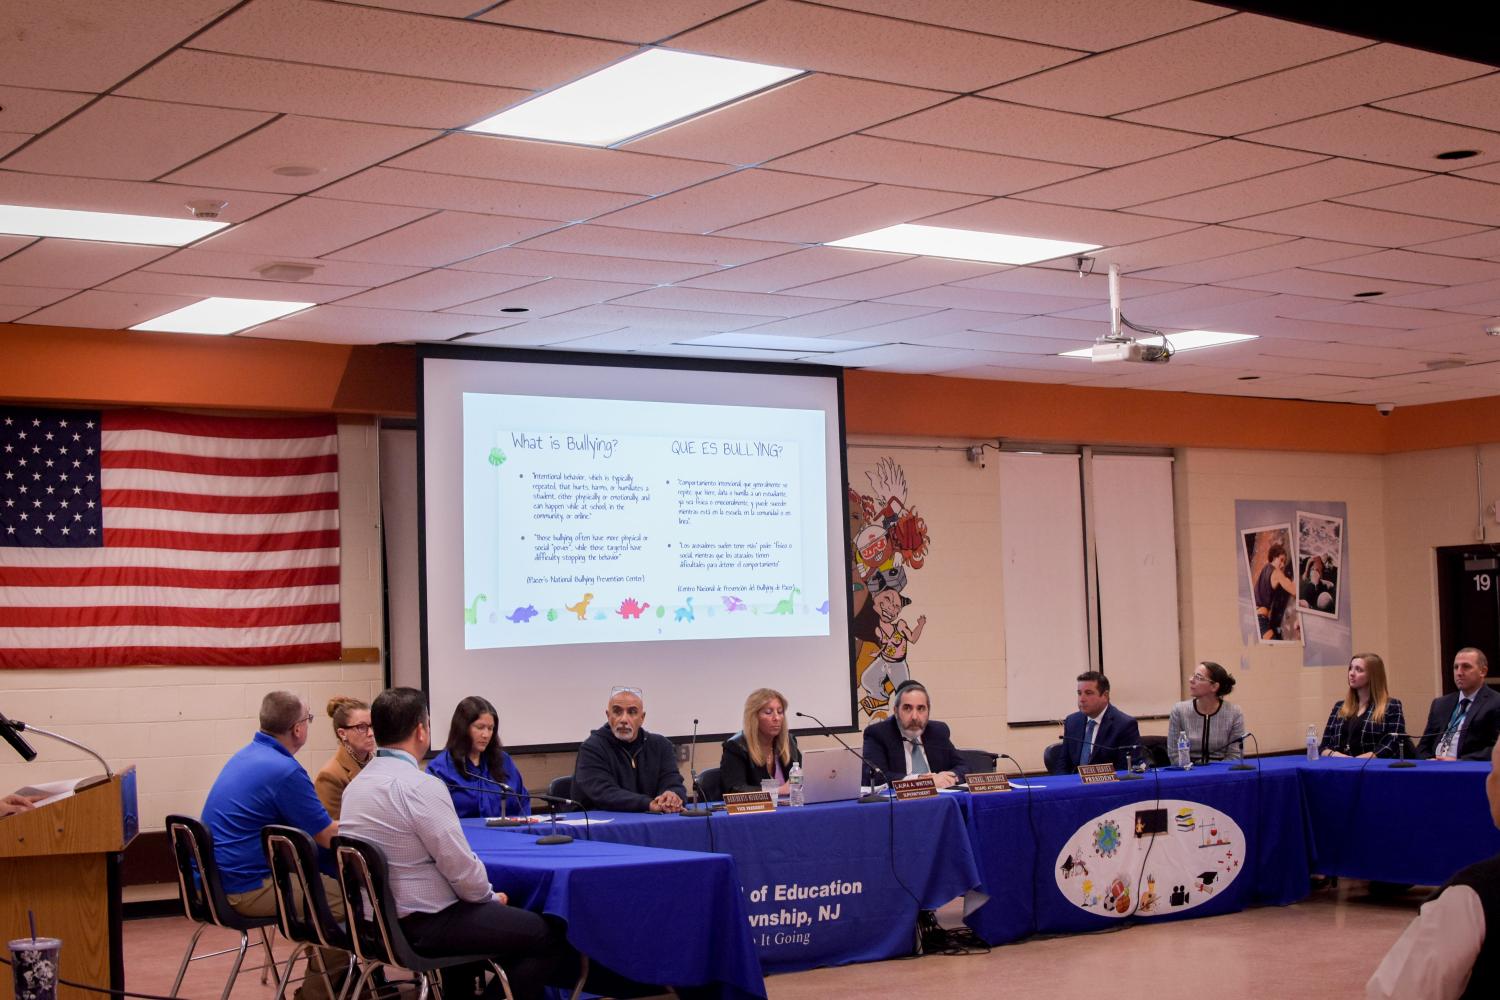 In the middle, district superintendent Laura Winters, board attorney Michael Inzelbuch (Winter's left), board member Heriberto Rodriguez (Winter's right) along with school administration staff.Jcc 8064